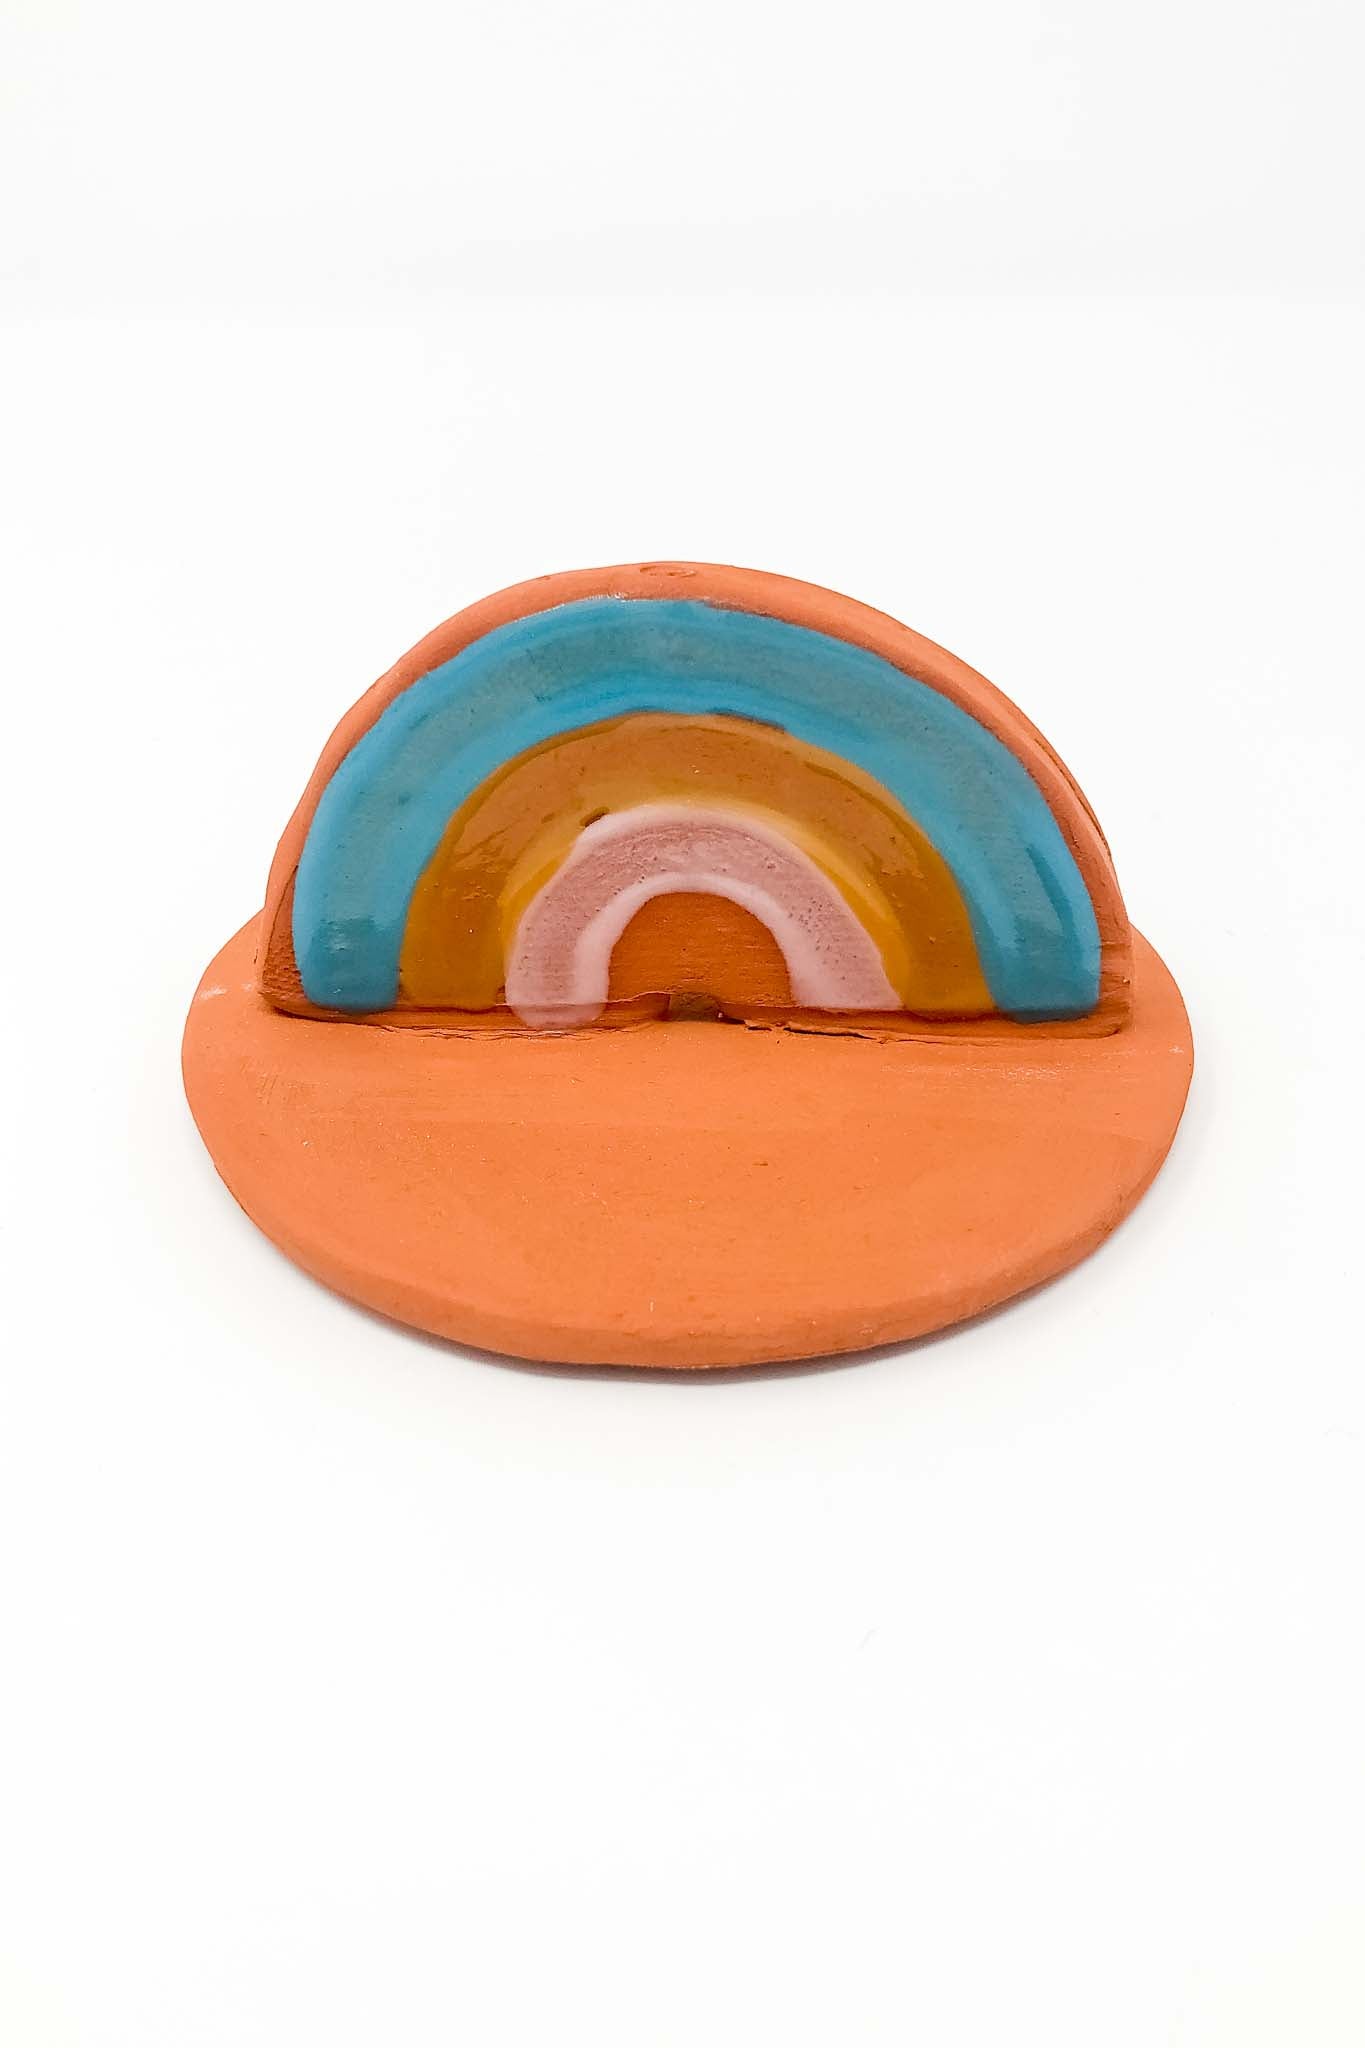 Rainbow Incense Holders - The Canyon